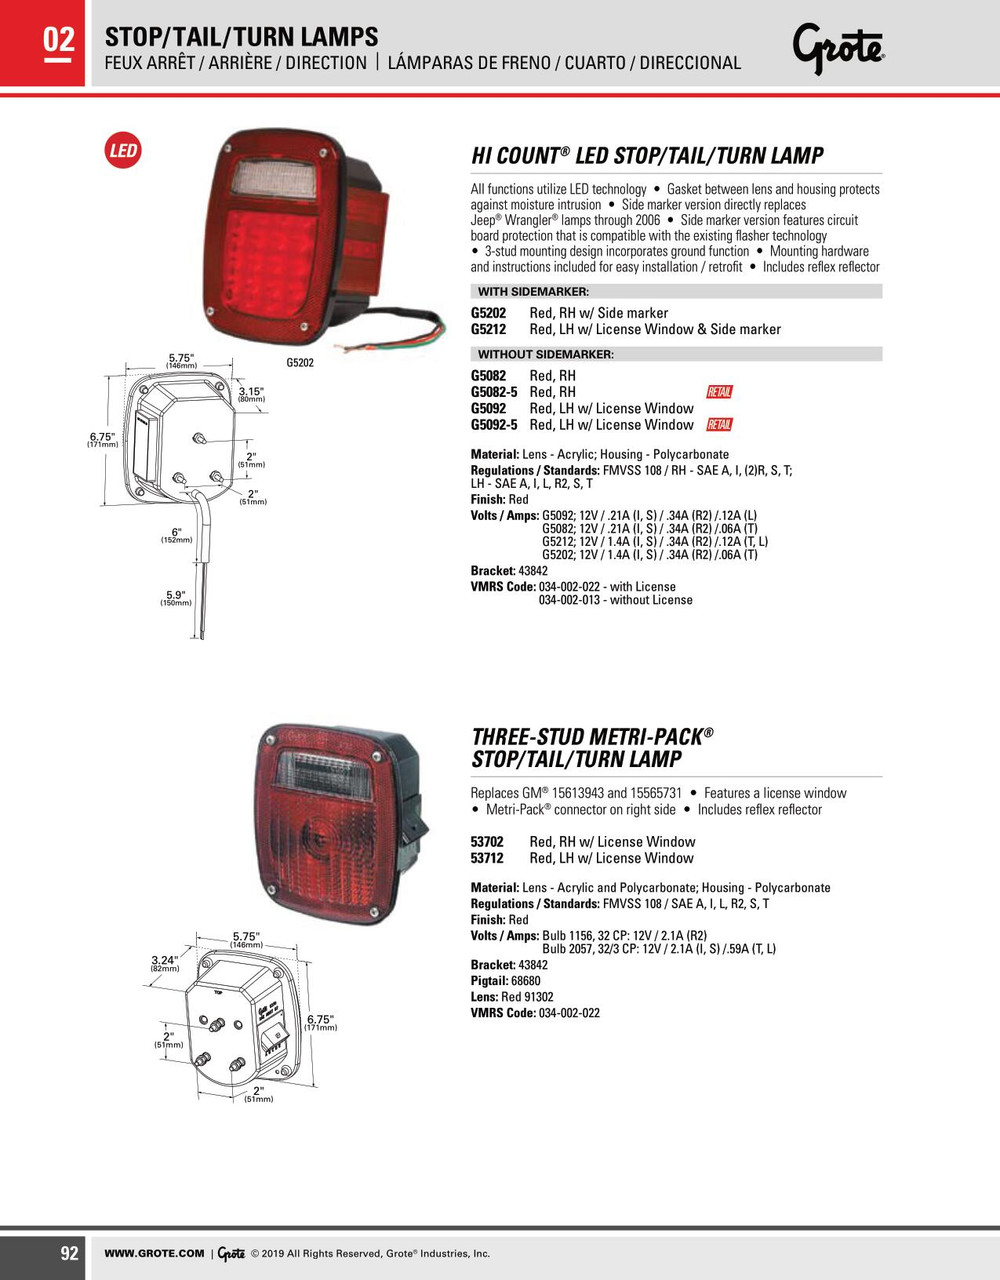 Hi Count® LED Stop/Tail/Turn Lamp Left Hand & License Window - Red/Clear  G5092